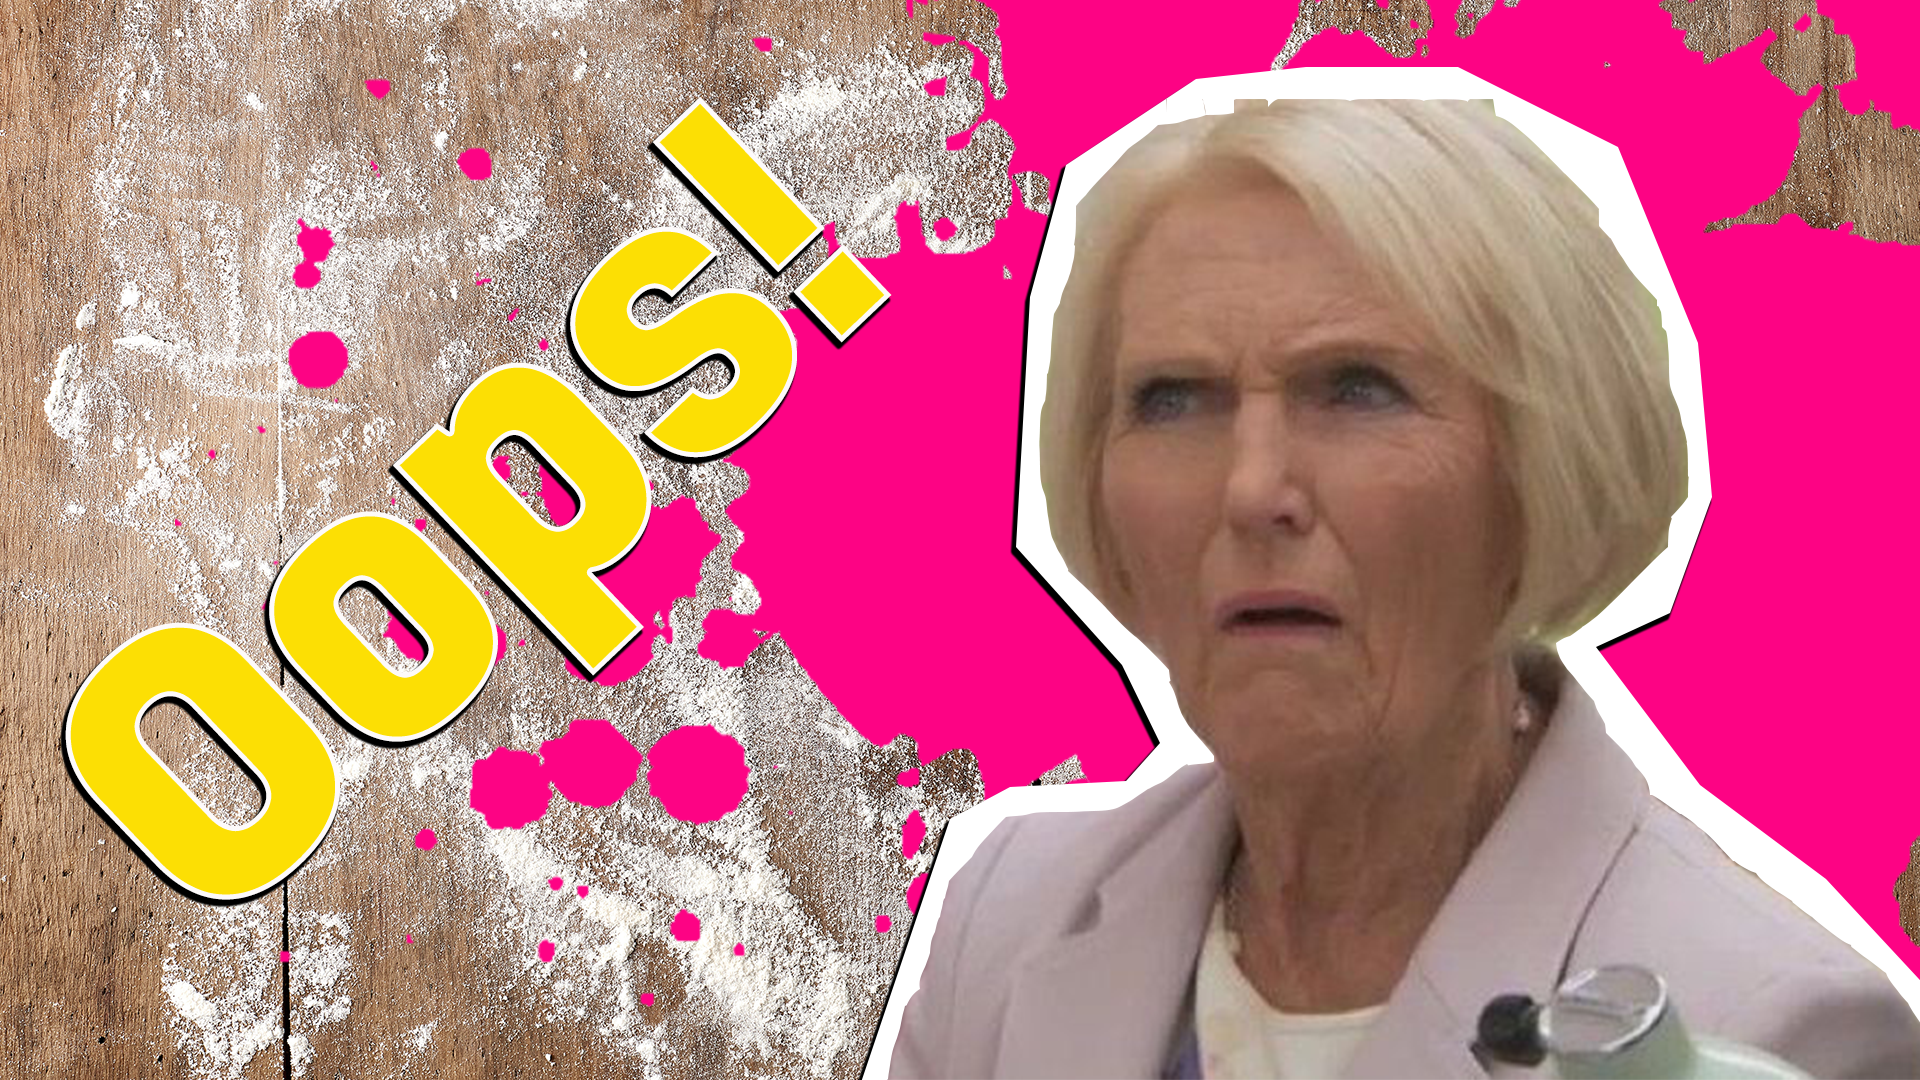 Oops! Looks like you need to rewatch GBBO! Don't worry, you can always have another go and bring your score up!